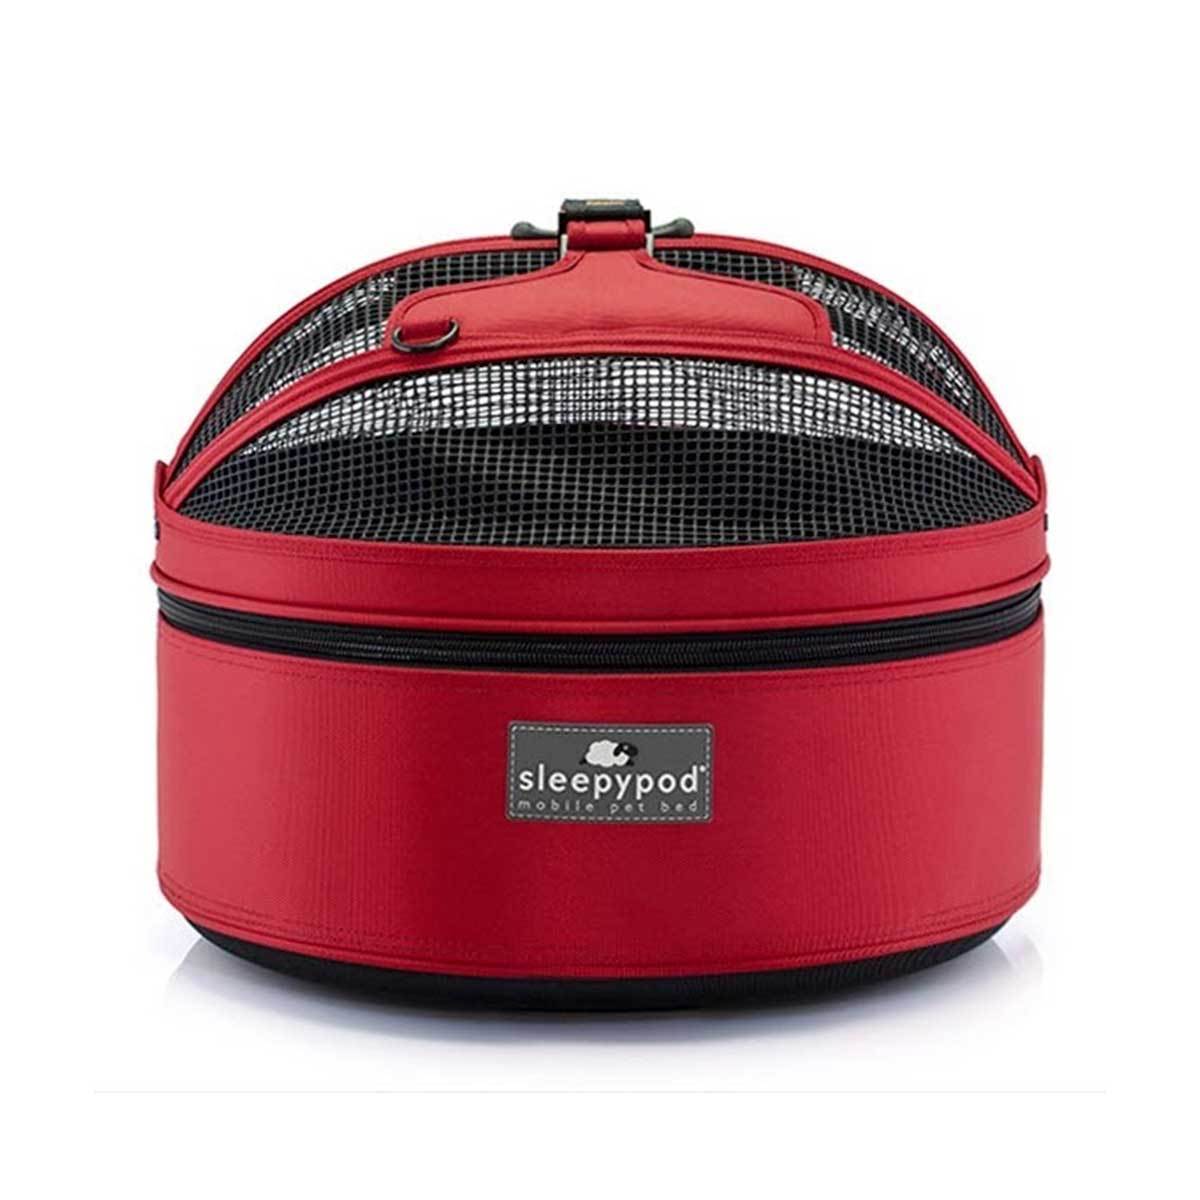 Sleepypod Dog Carrier in Strawberry Red | Pawlicious & Company